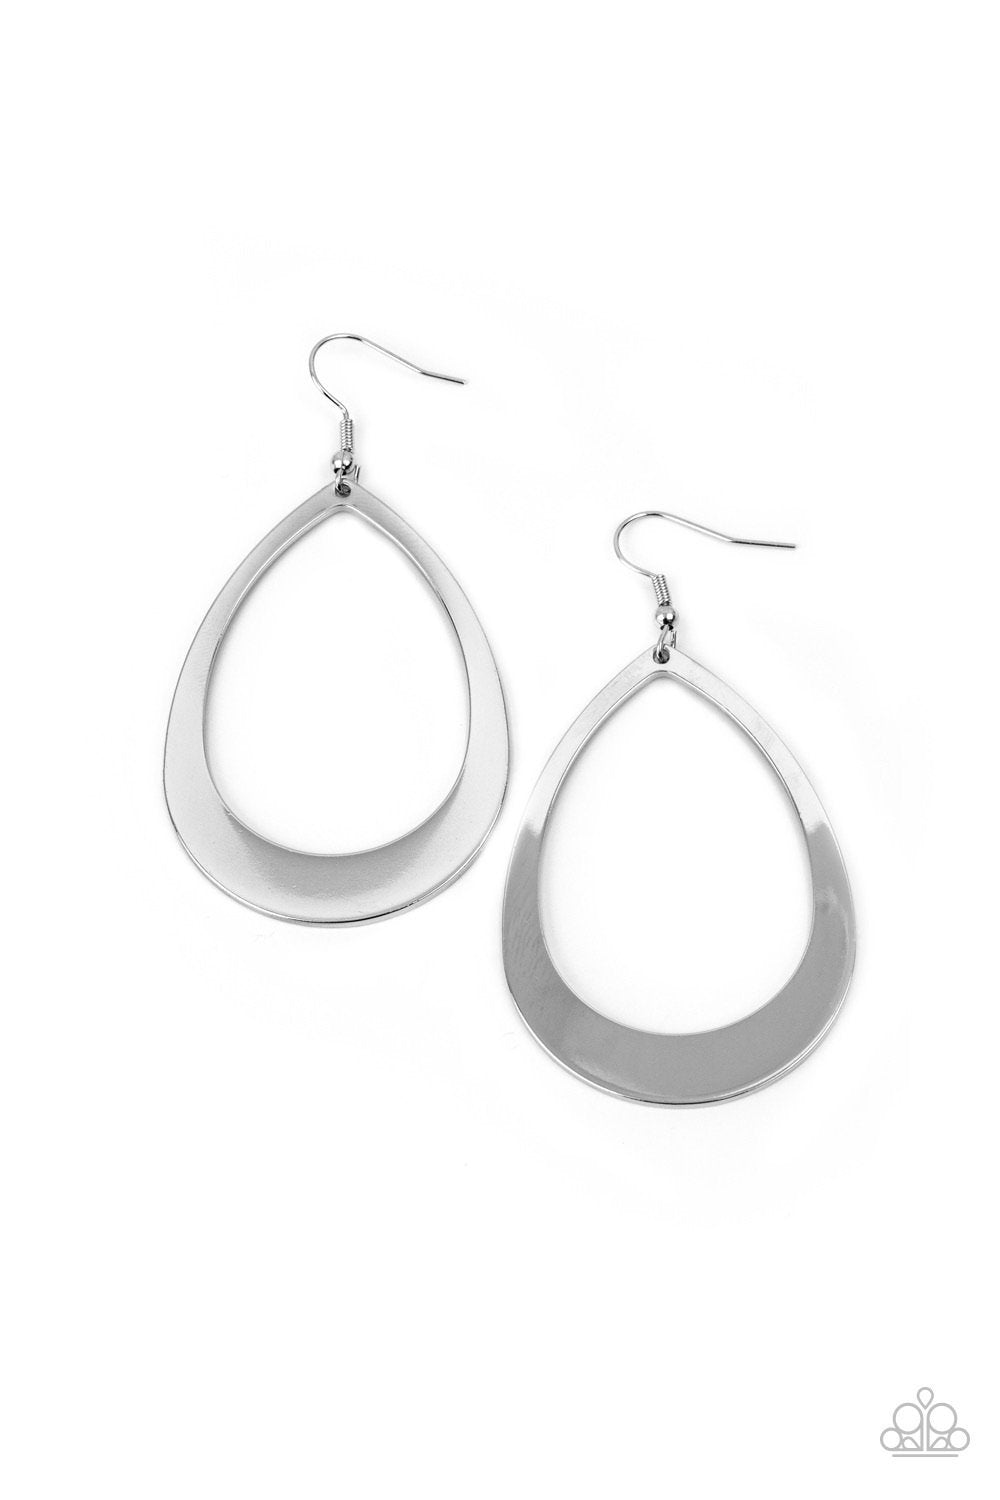 &lt;meta charset=\&quot;UTF-8\&quot;&gt;
&lt;p&gt;Widening at the bottom, a flat glistening silver teardrop swings from the ear for a simplistic shimmer. Earring attaches to a standard fishhook fitting.&lt;/p&gt;
&lt;p&gt;&lt;i&gt;Sold as one pair of earrings.&lt;/i&gt;&lt;/p&gt;